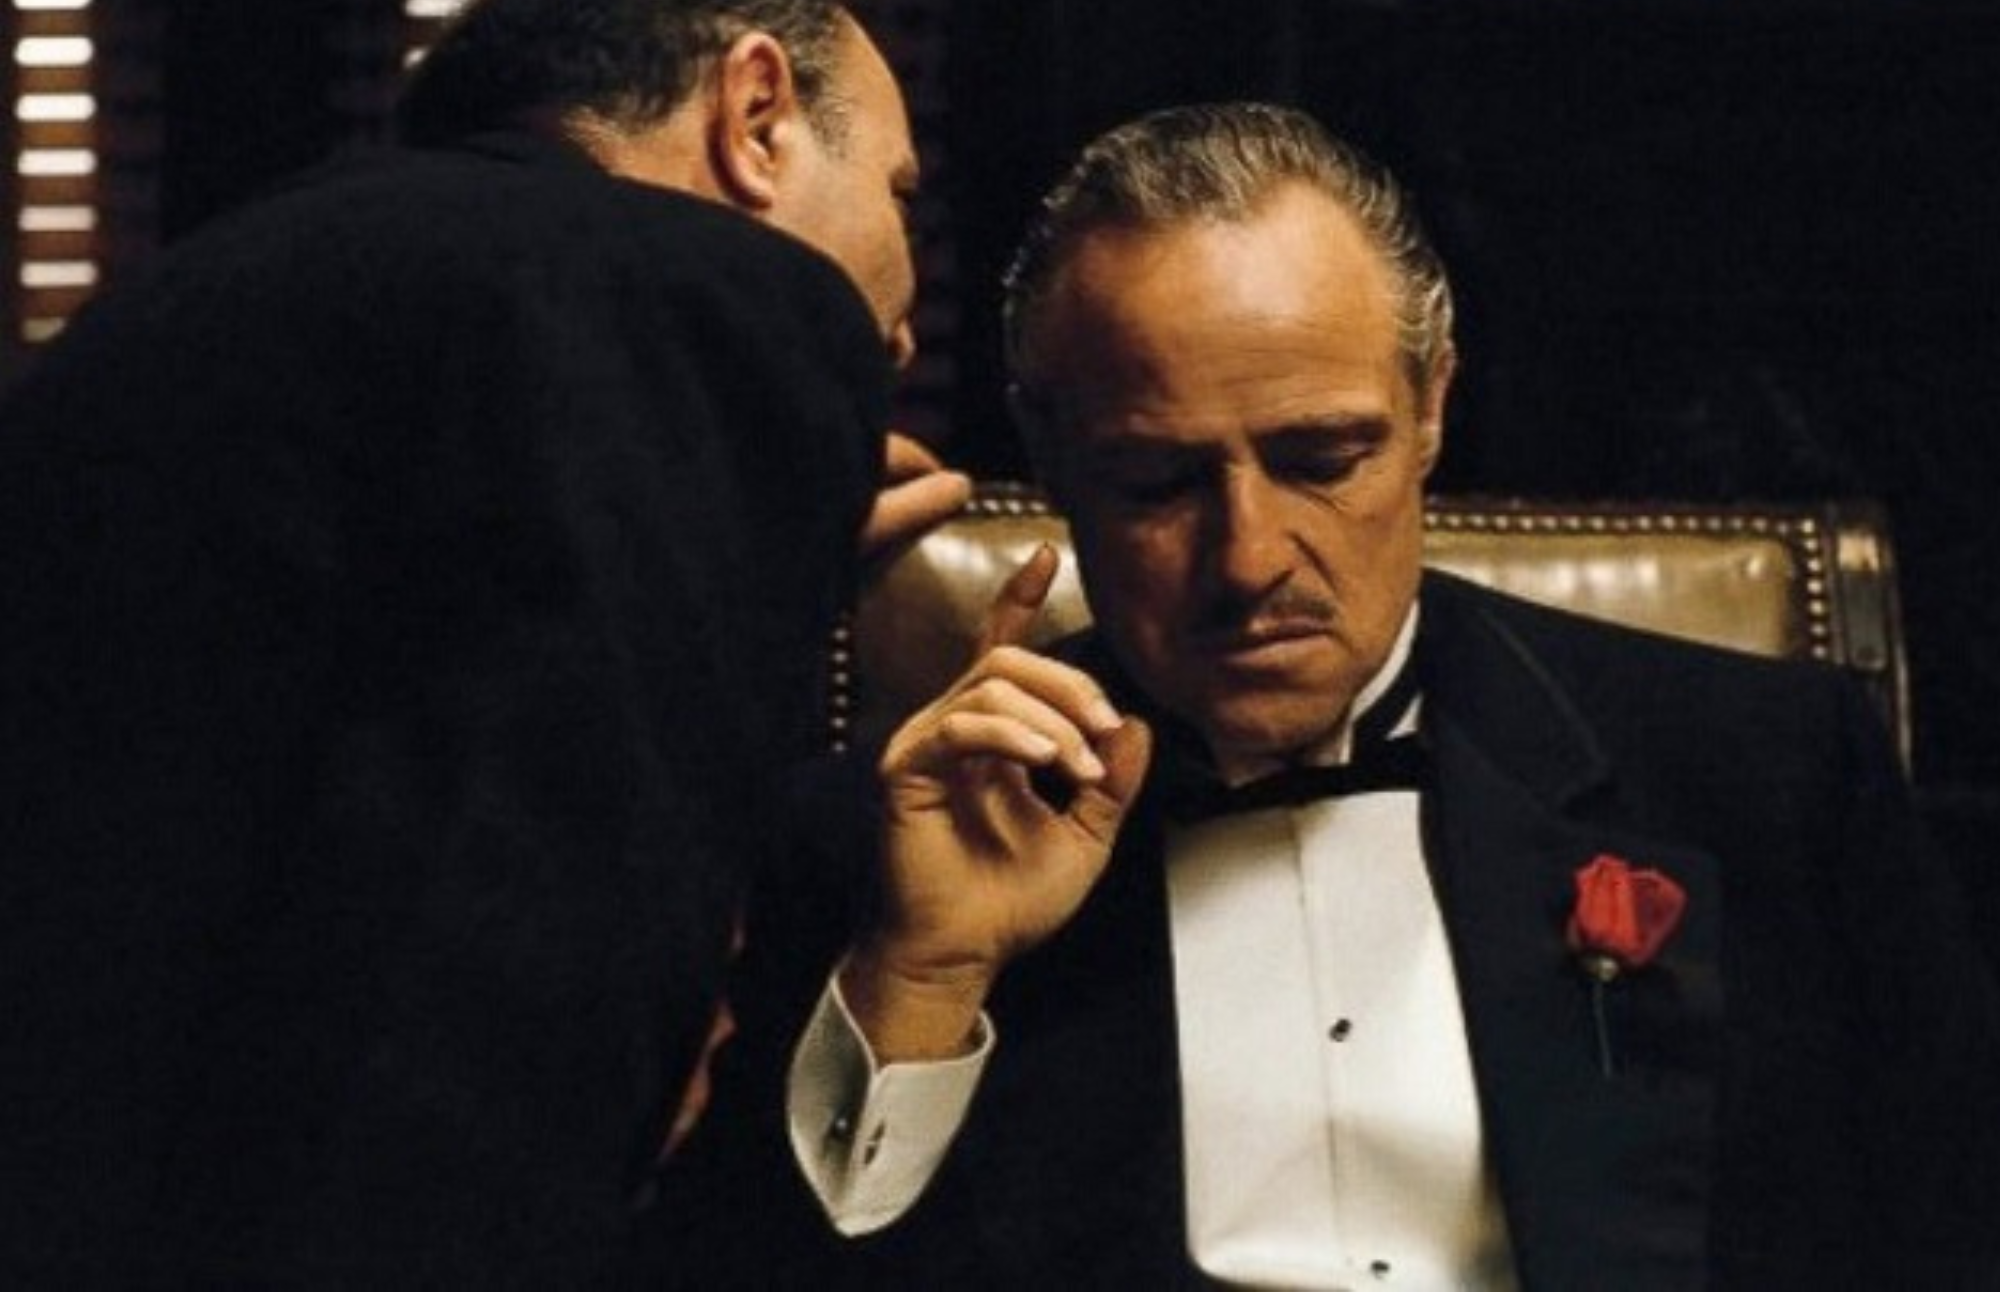 The baker whispering to Don Corleone in his office